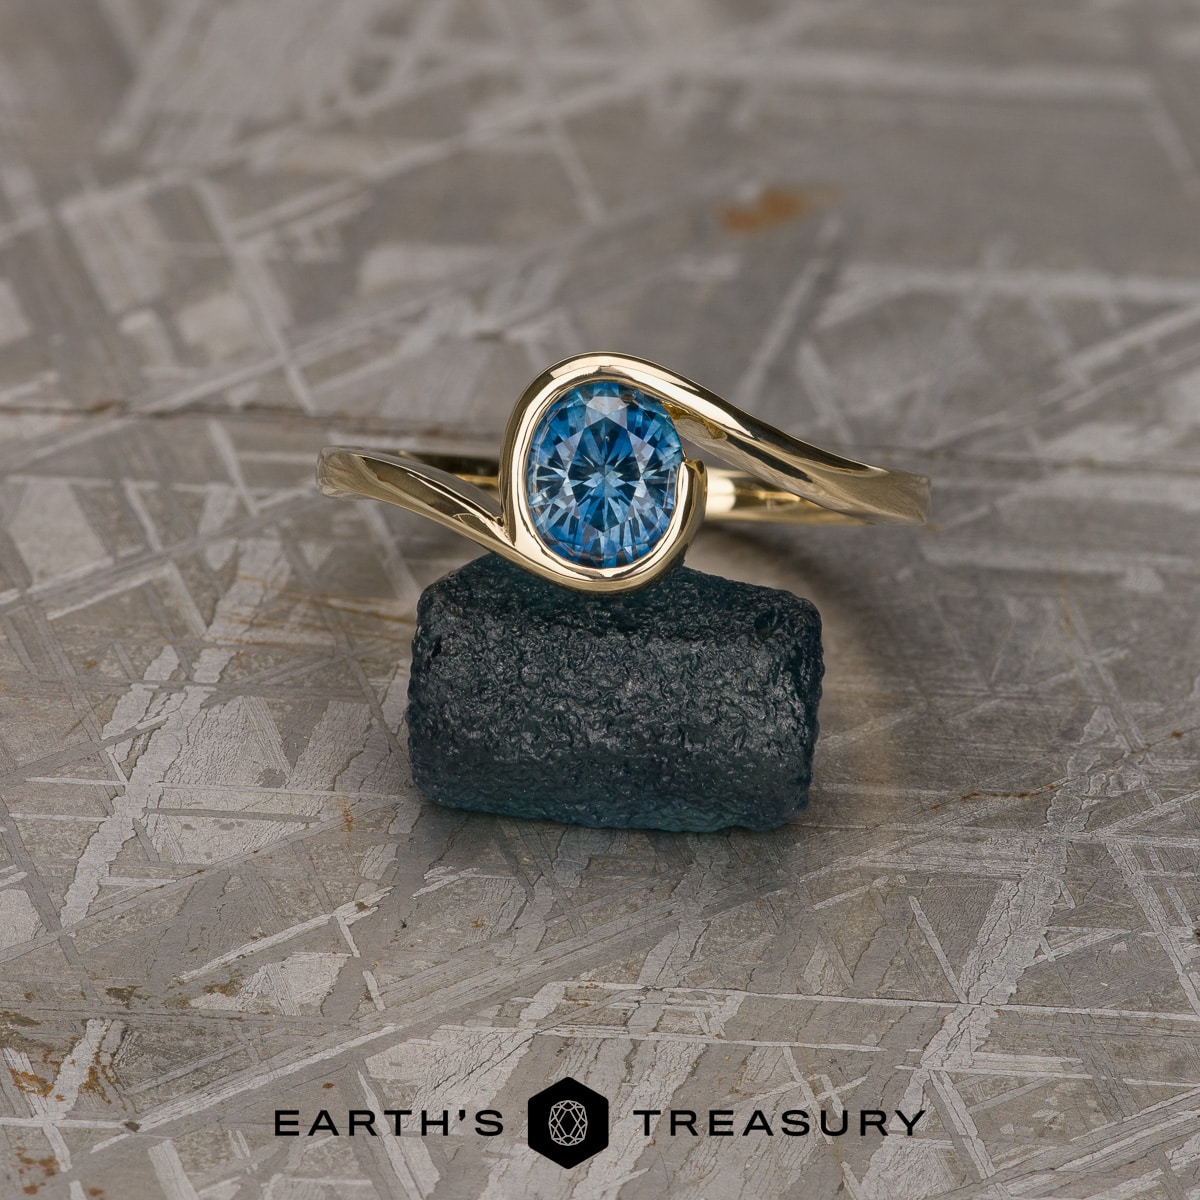 The "Calliste" Ring in 14k yellow gold with 1.10-Carat Montana Sapphire